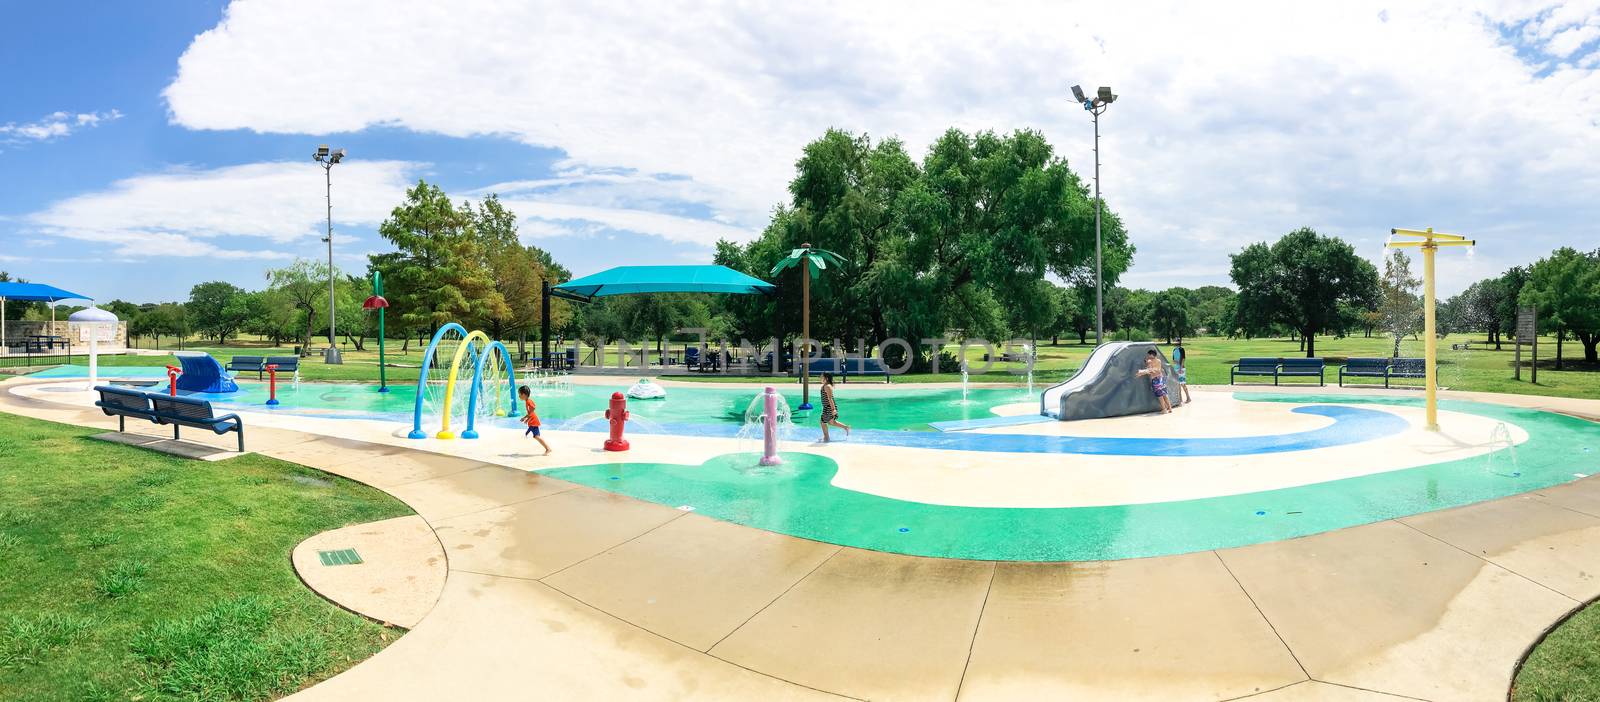 Panoramic colorful splash pad water playground with Asian toddler boy playing near Dallas, Texas, America by trongnguyen